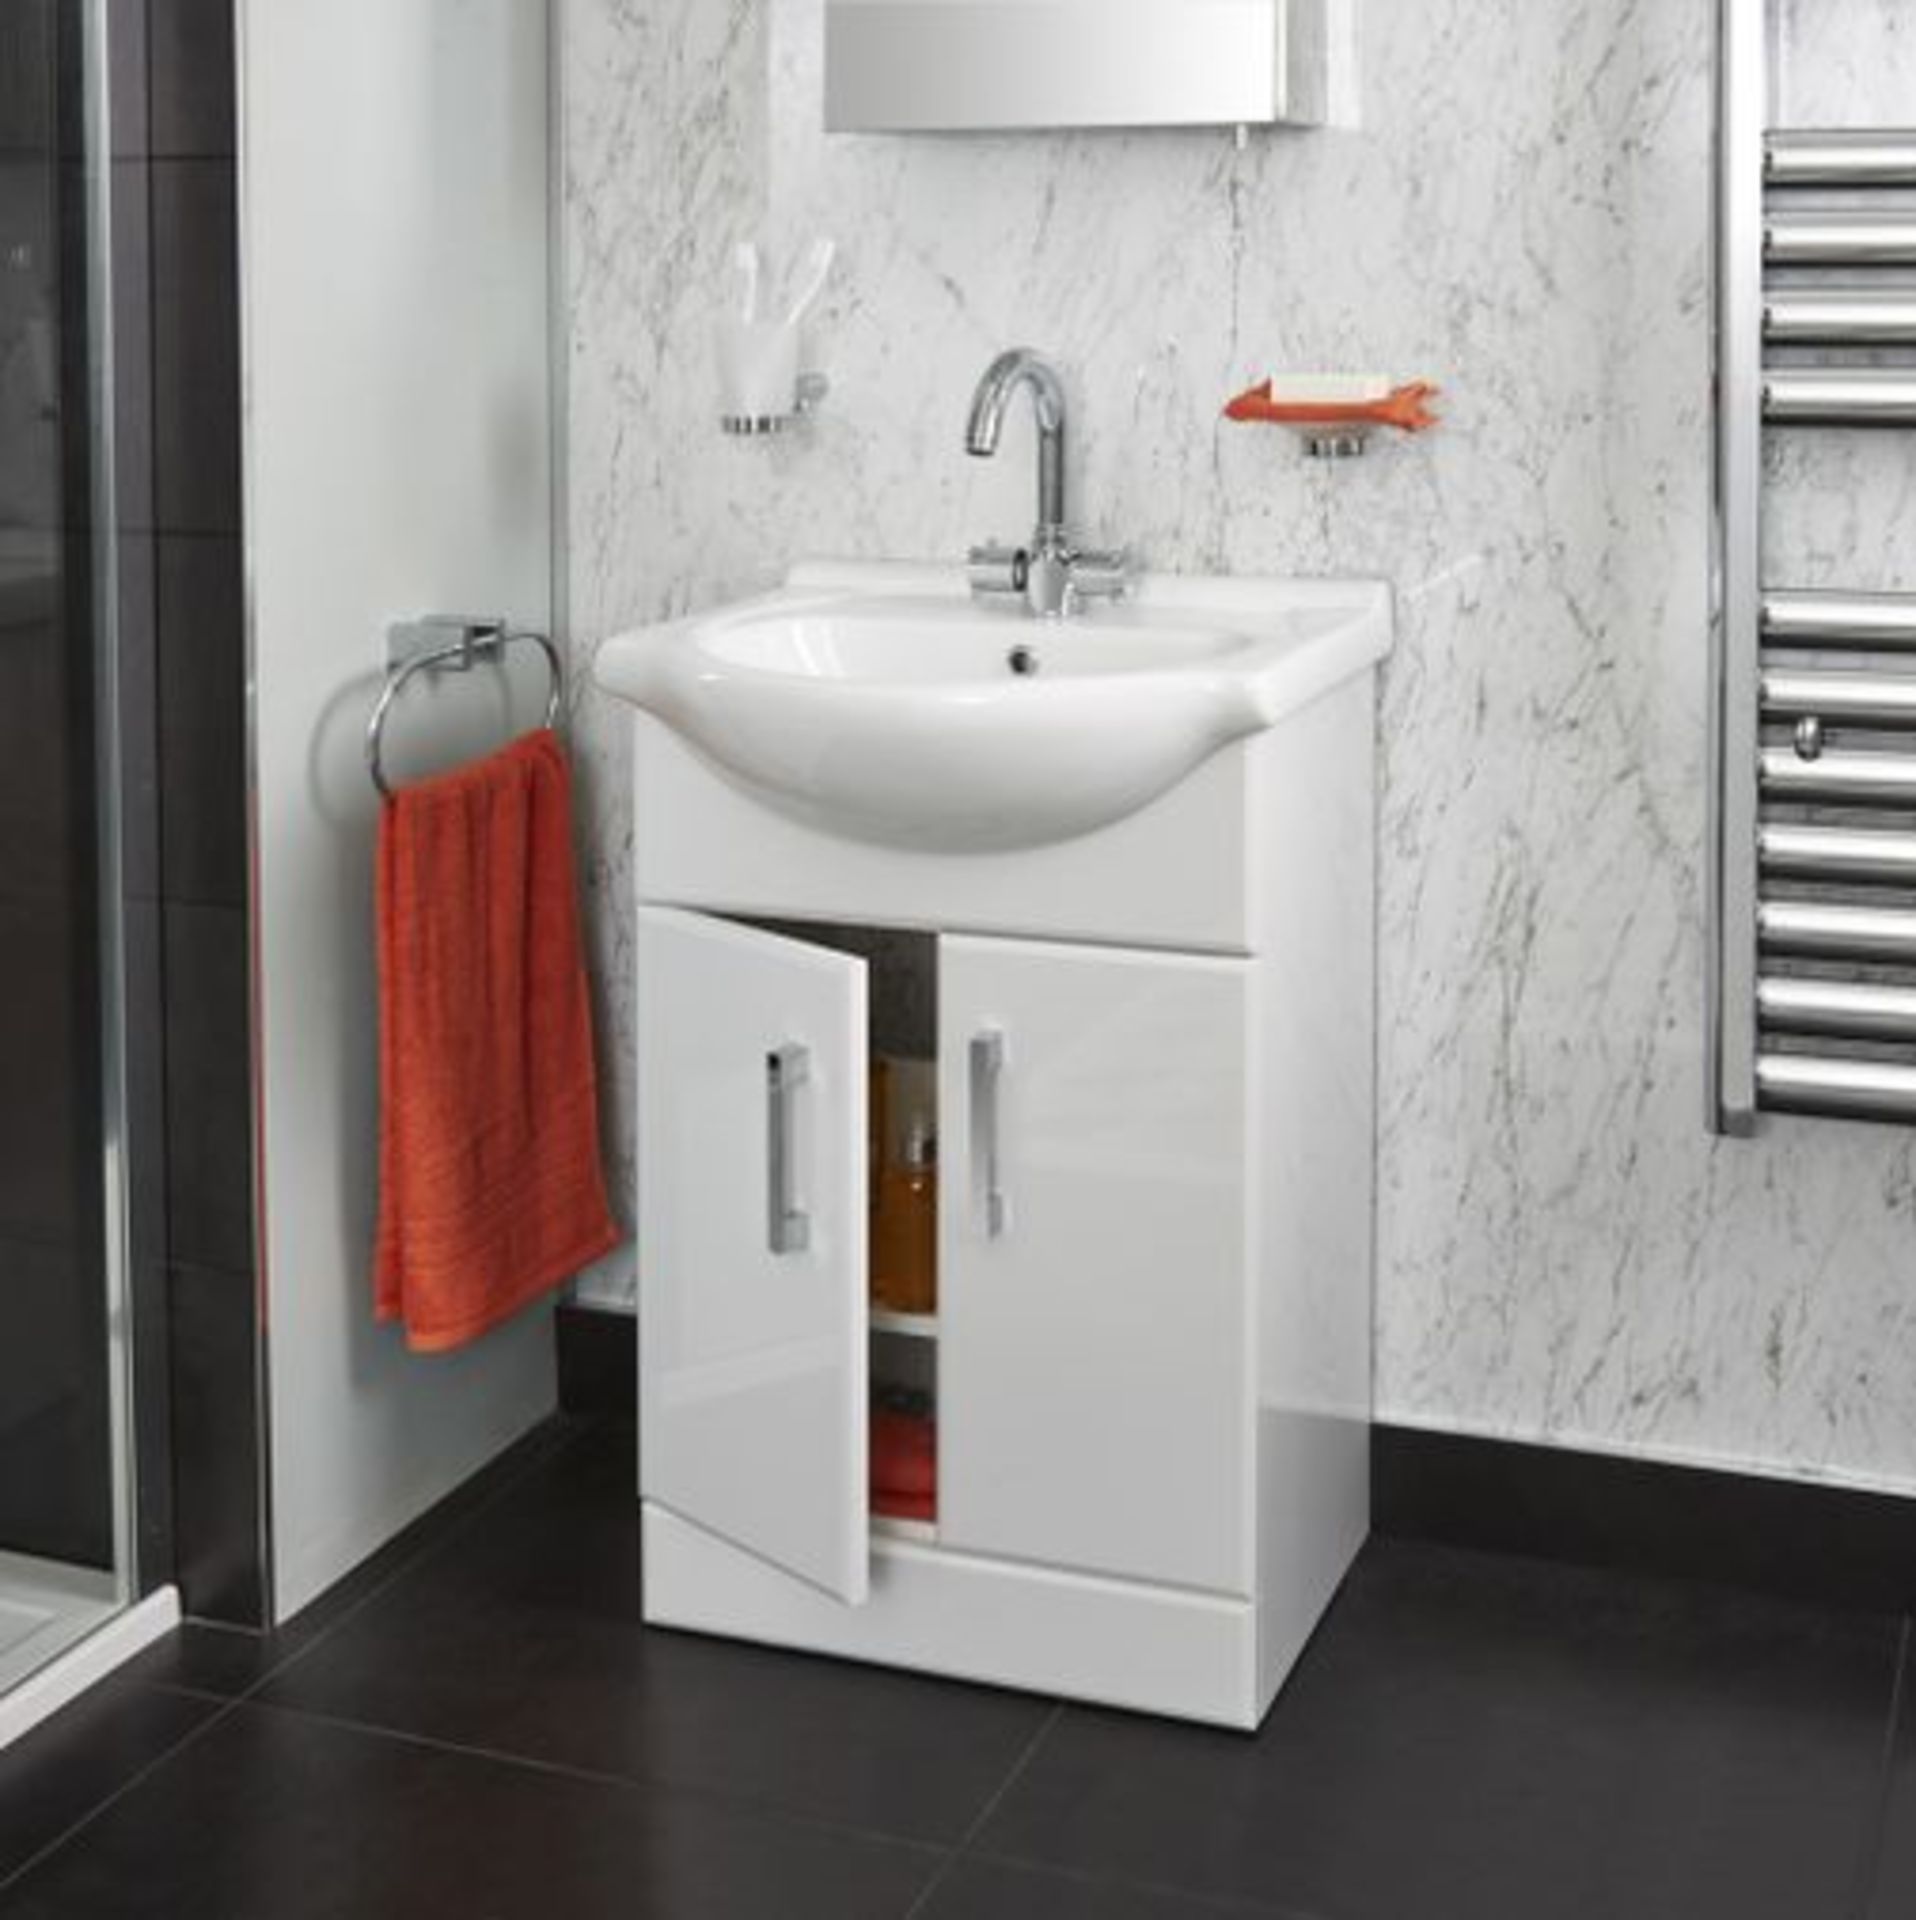 New (A71) Lanza 550mm Vanity Unit. RRP £403.99. Comes Complete With Basin. - Image 3 of 3